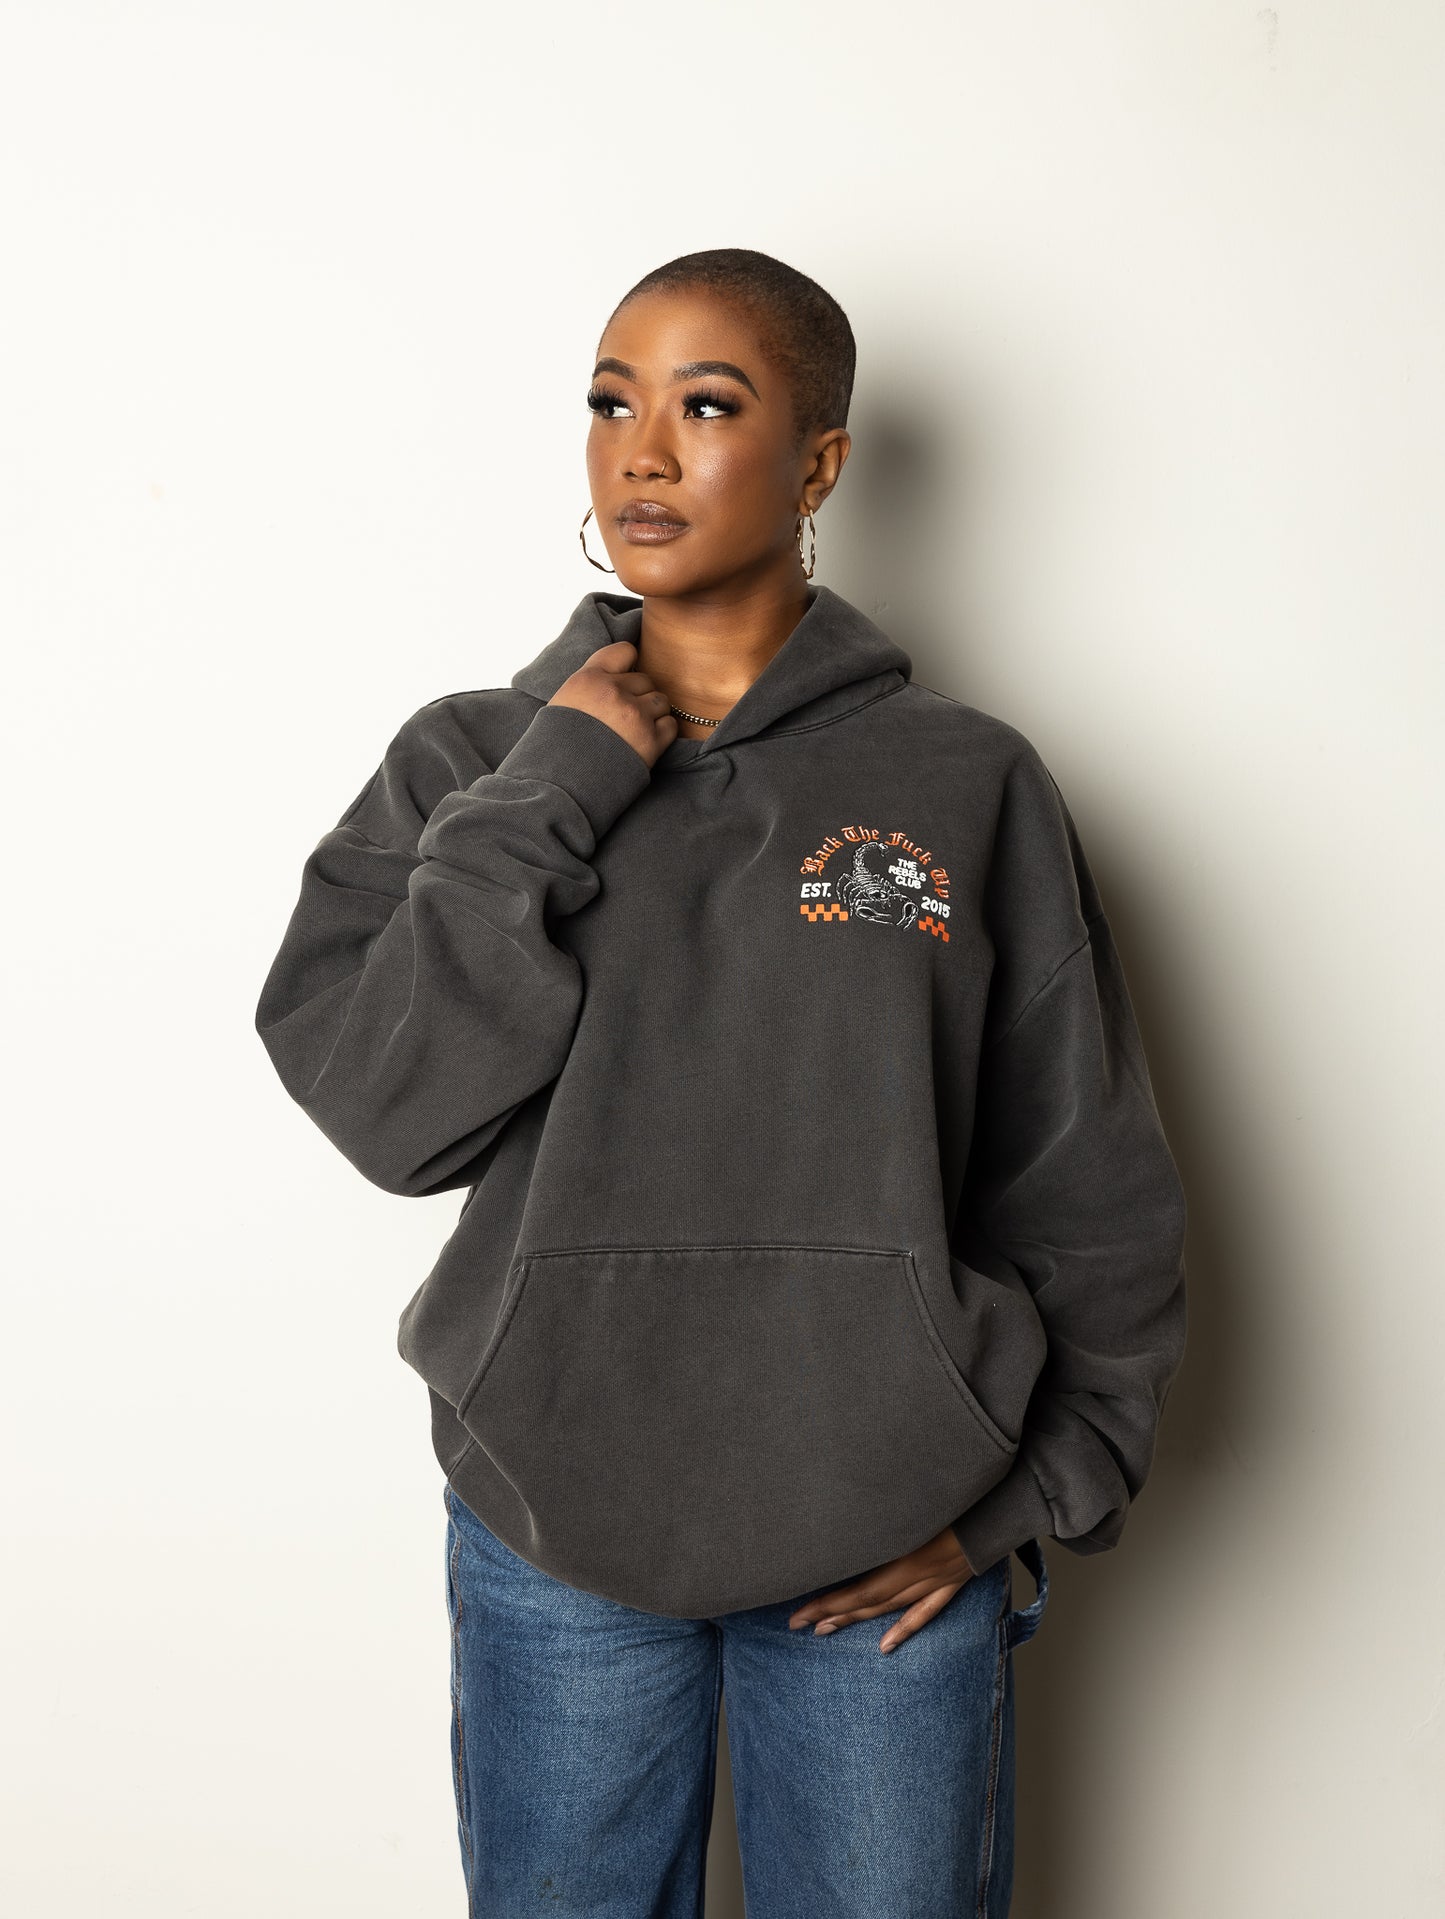 Scorpion Hoodie - REBEL SOUL COLLECTIVE